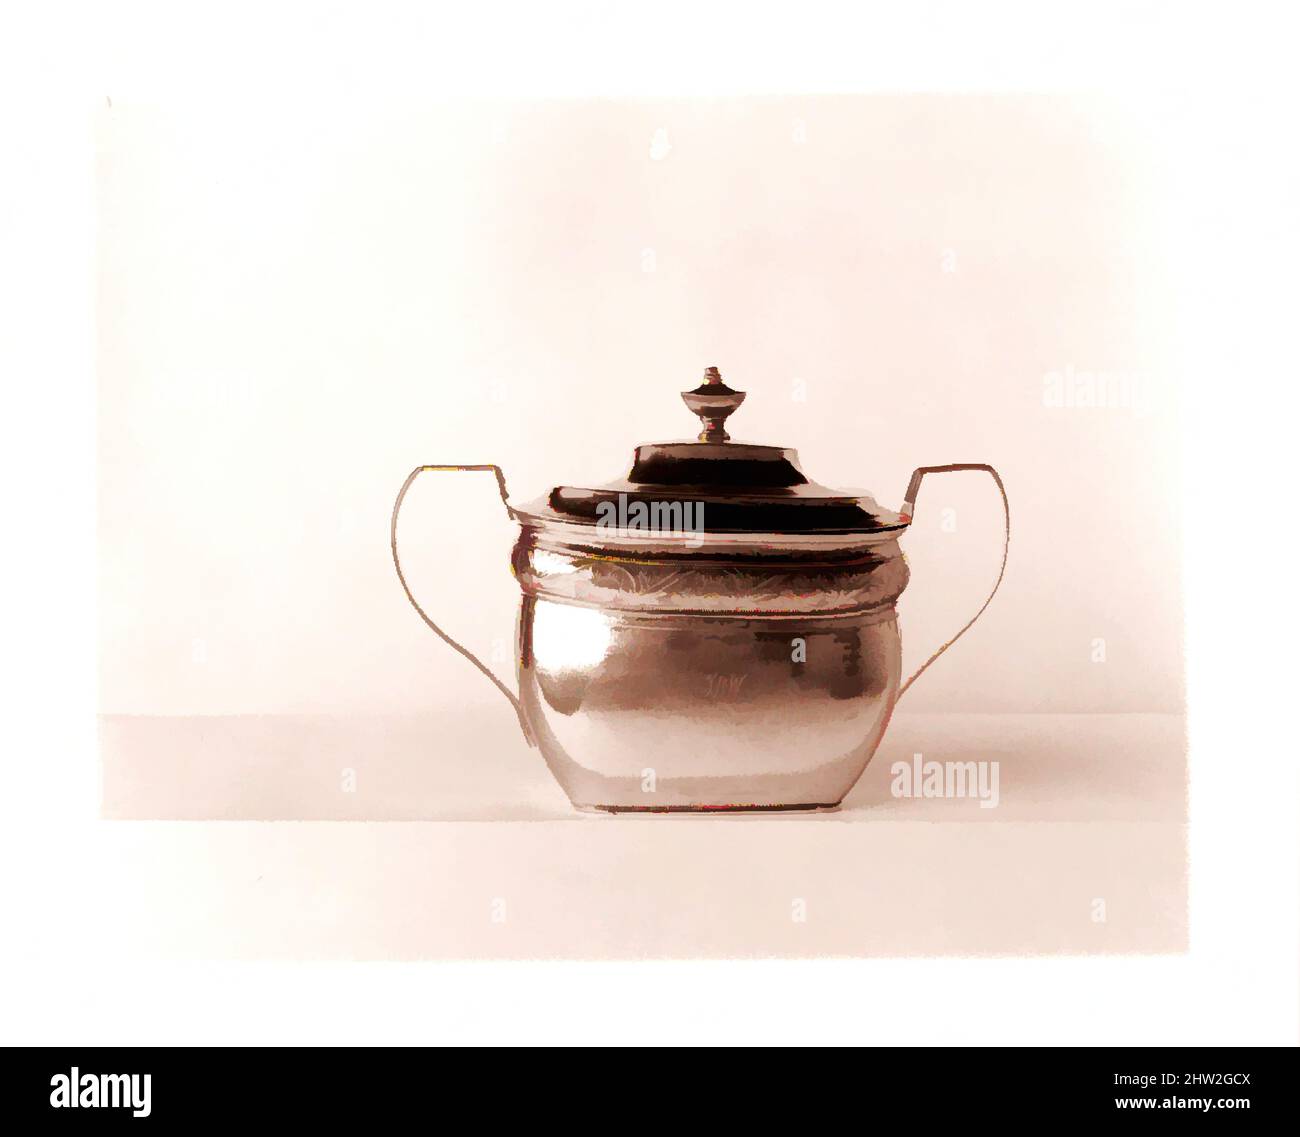 Art inspired by Sugar Bowl, 1800–1810, Made in New York, New York, United States, American, Silver, Overall: 6 3/16 x 8 7/8 x 3 3/4 in. (15.7 x 22.5 x 9.5 cm); 14 oz. 12 dwt. (454.1 g), Silver, William G. Forbes (1751–1840, Classic works modernized by Artotop with a splash of modernity. Shapes, color and value, eye-catching visual impact on art. Emotions through freedom of artworks in a contemporary way. A timeless message pursuing a wildly creative new direction. Artists turning to the digital medium and creating the Artotop NFT Stock Photo